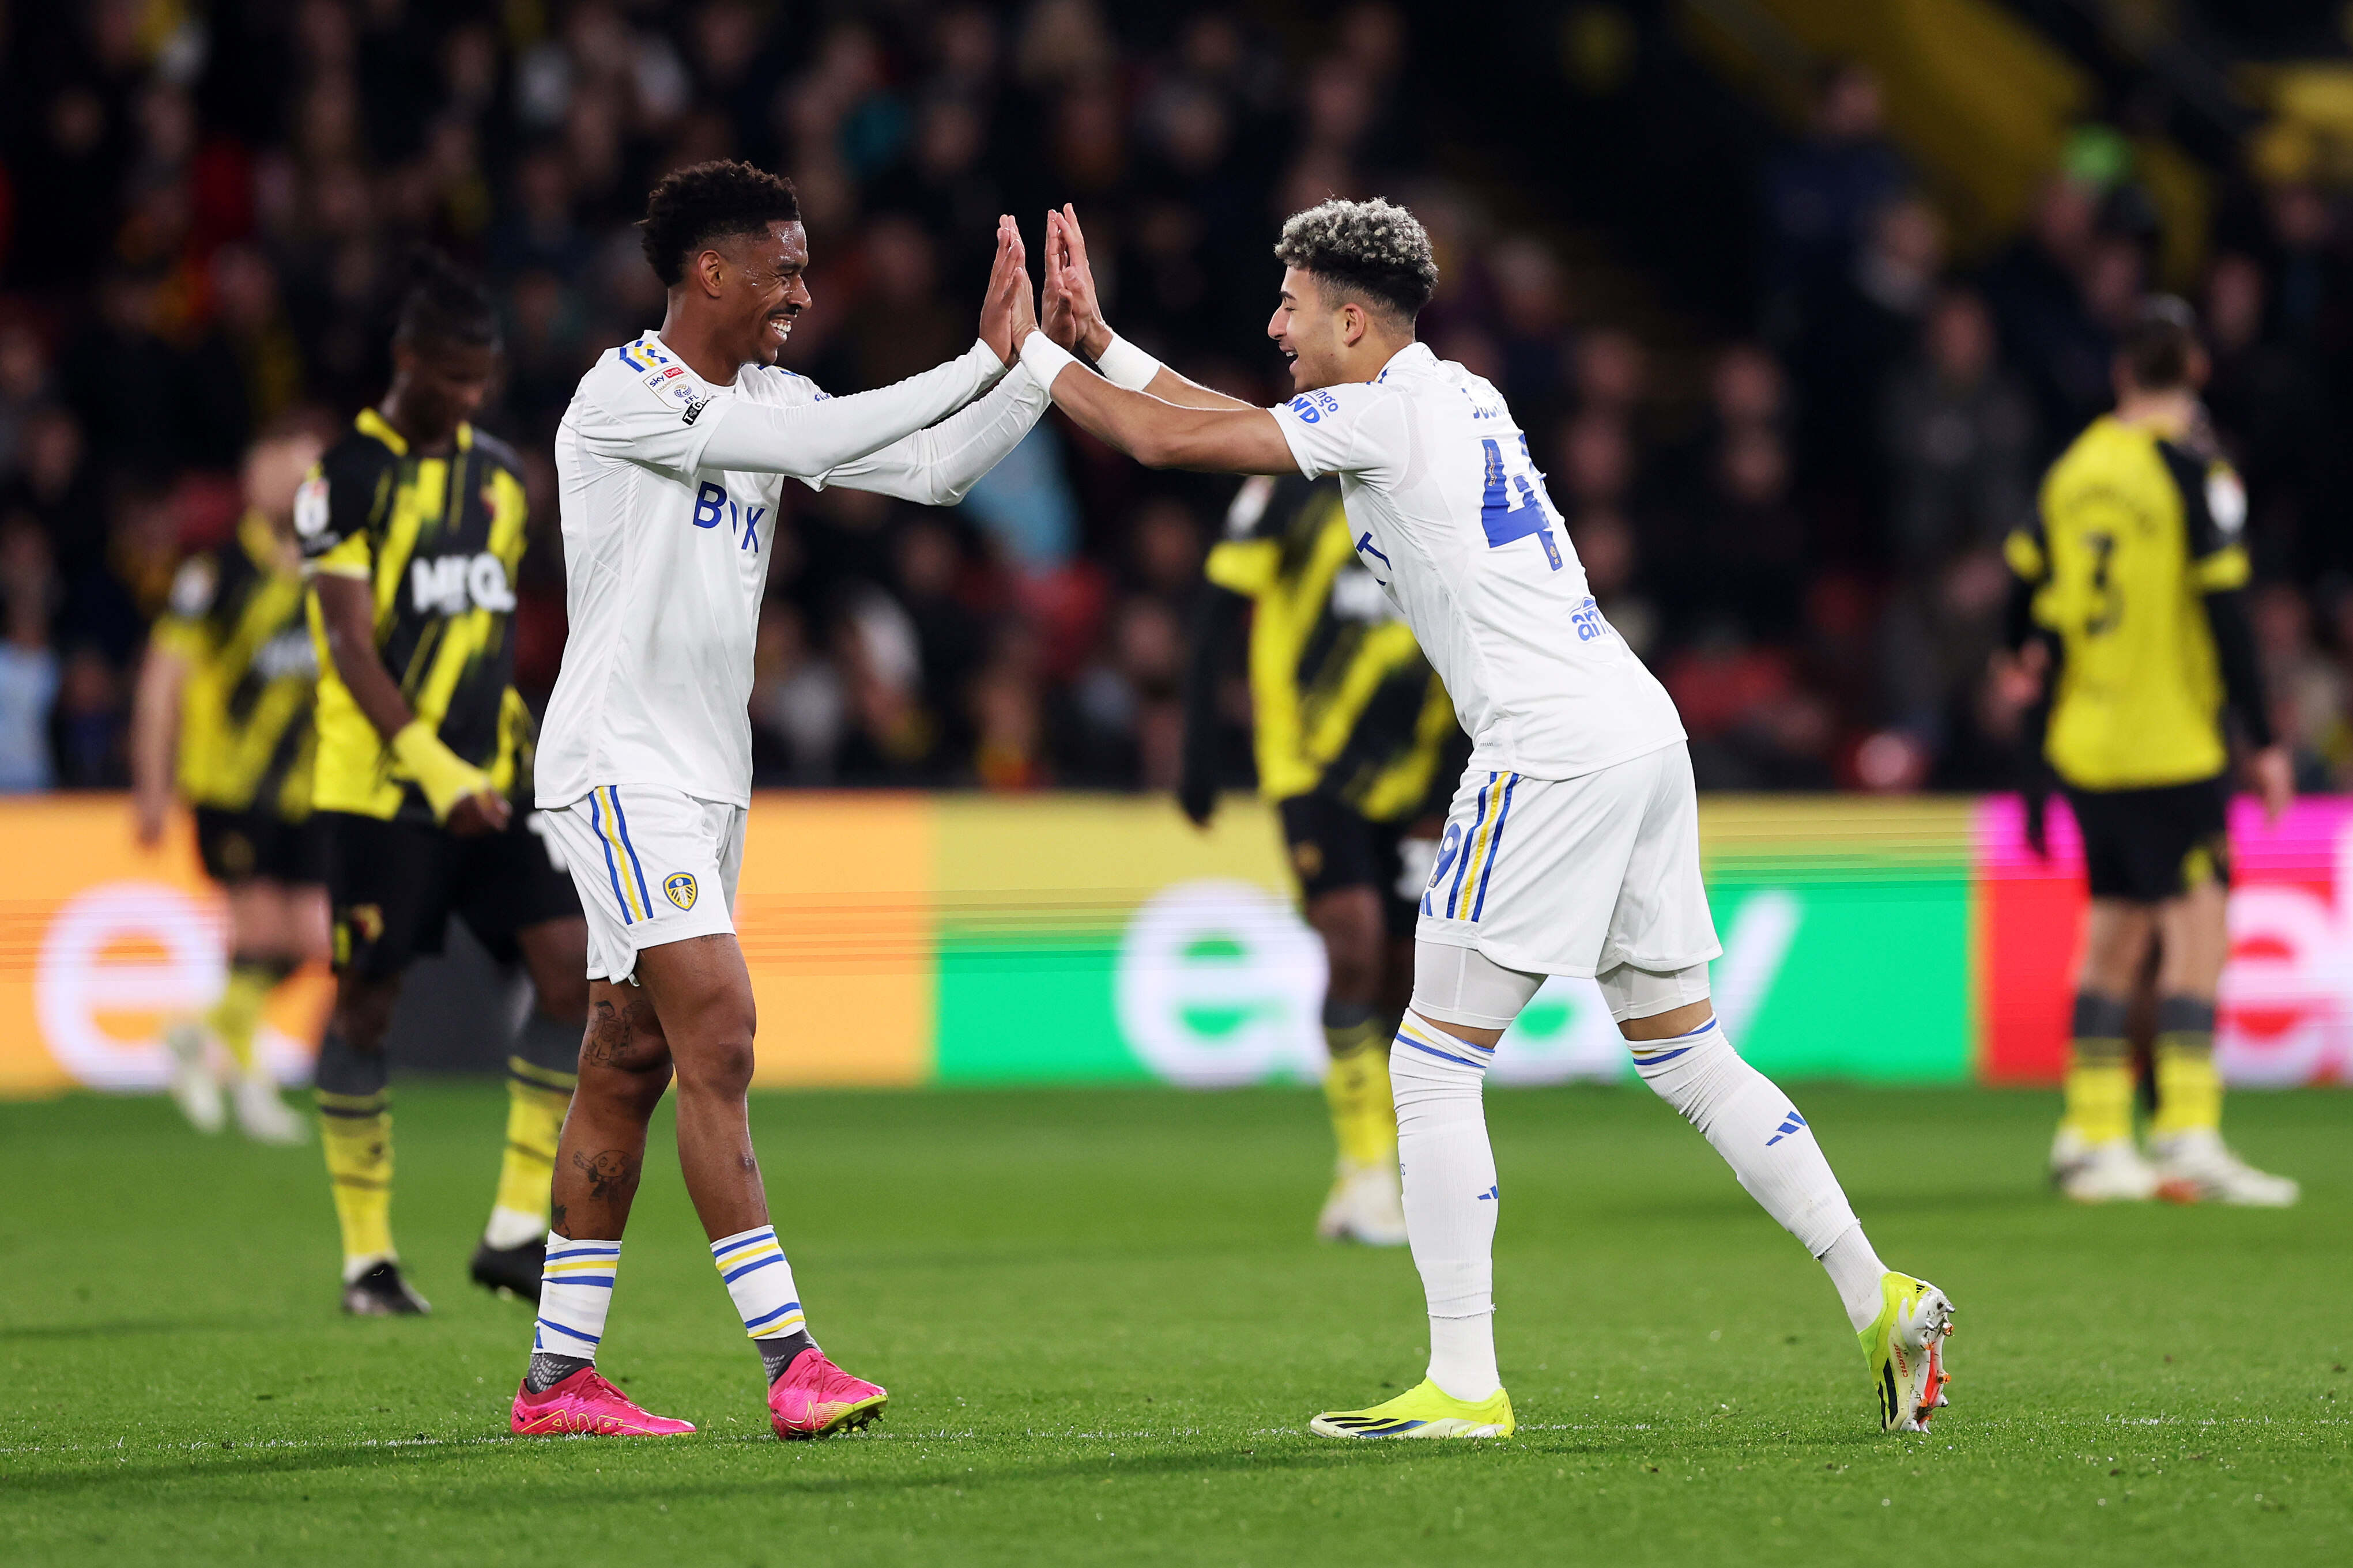 Leeds United defender Junior Firpo showed frustration at his teammates against Coventry City.